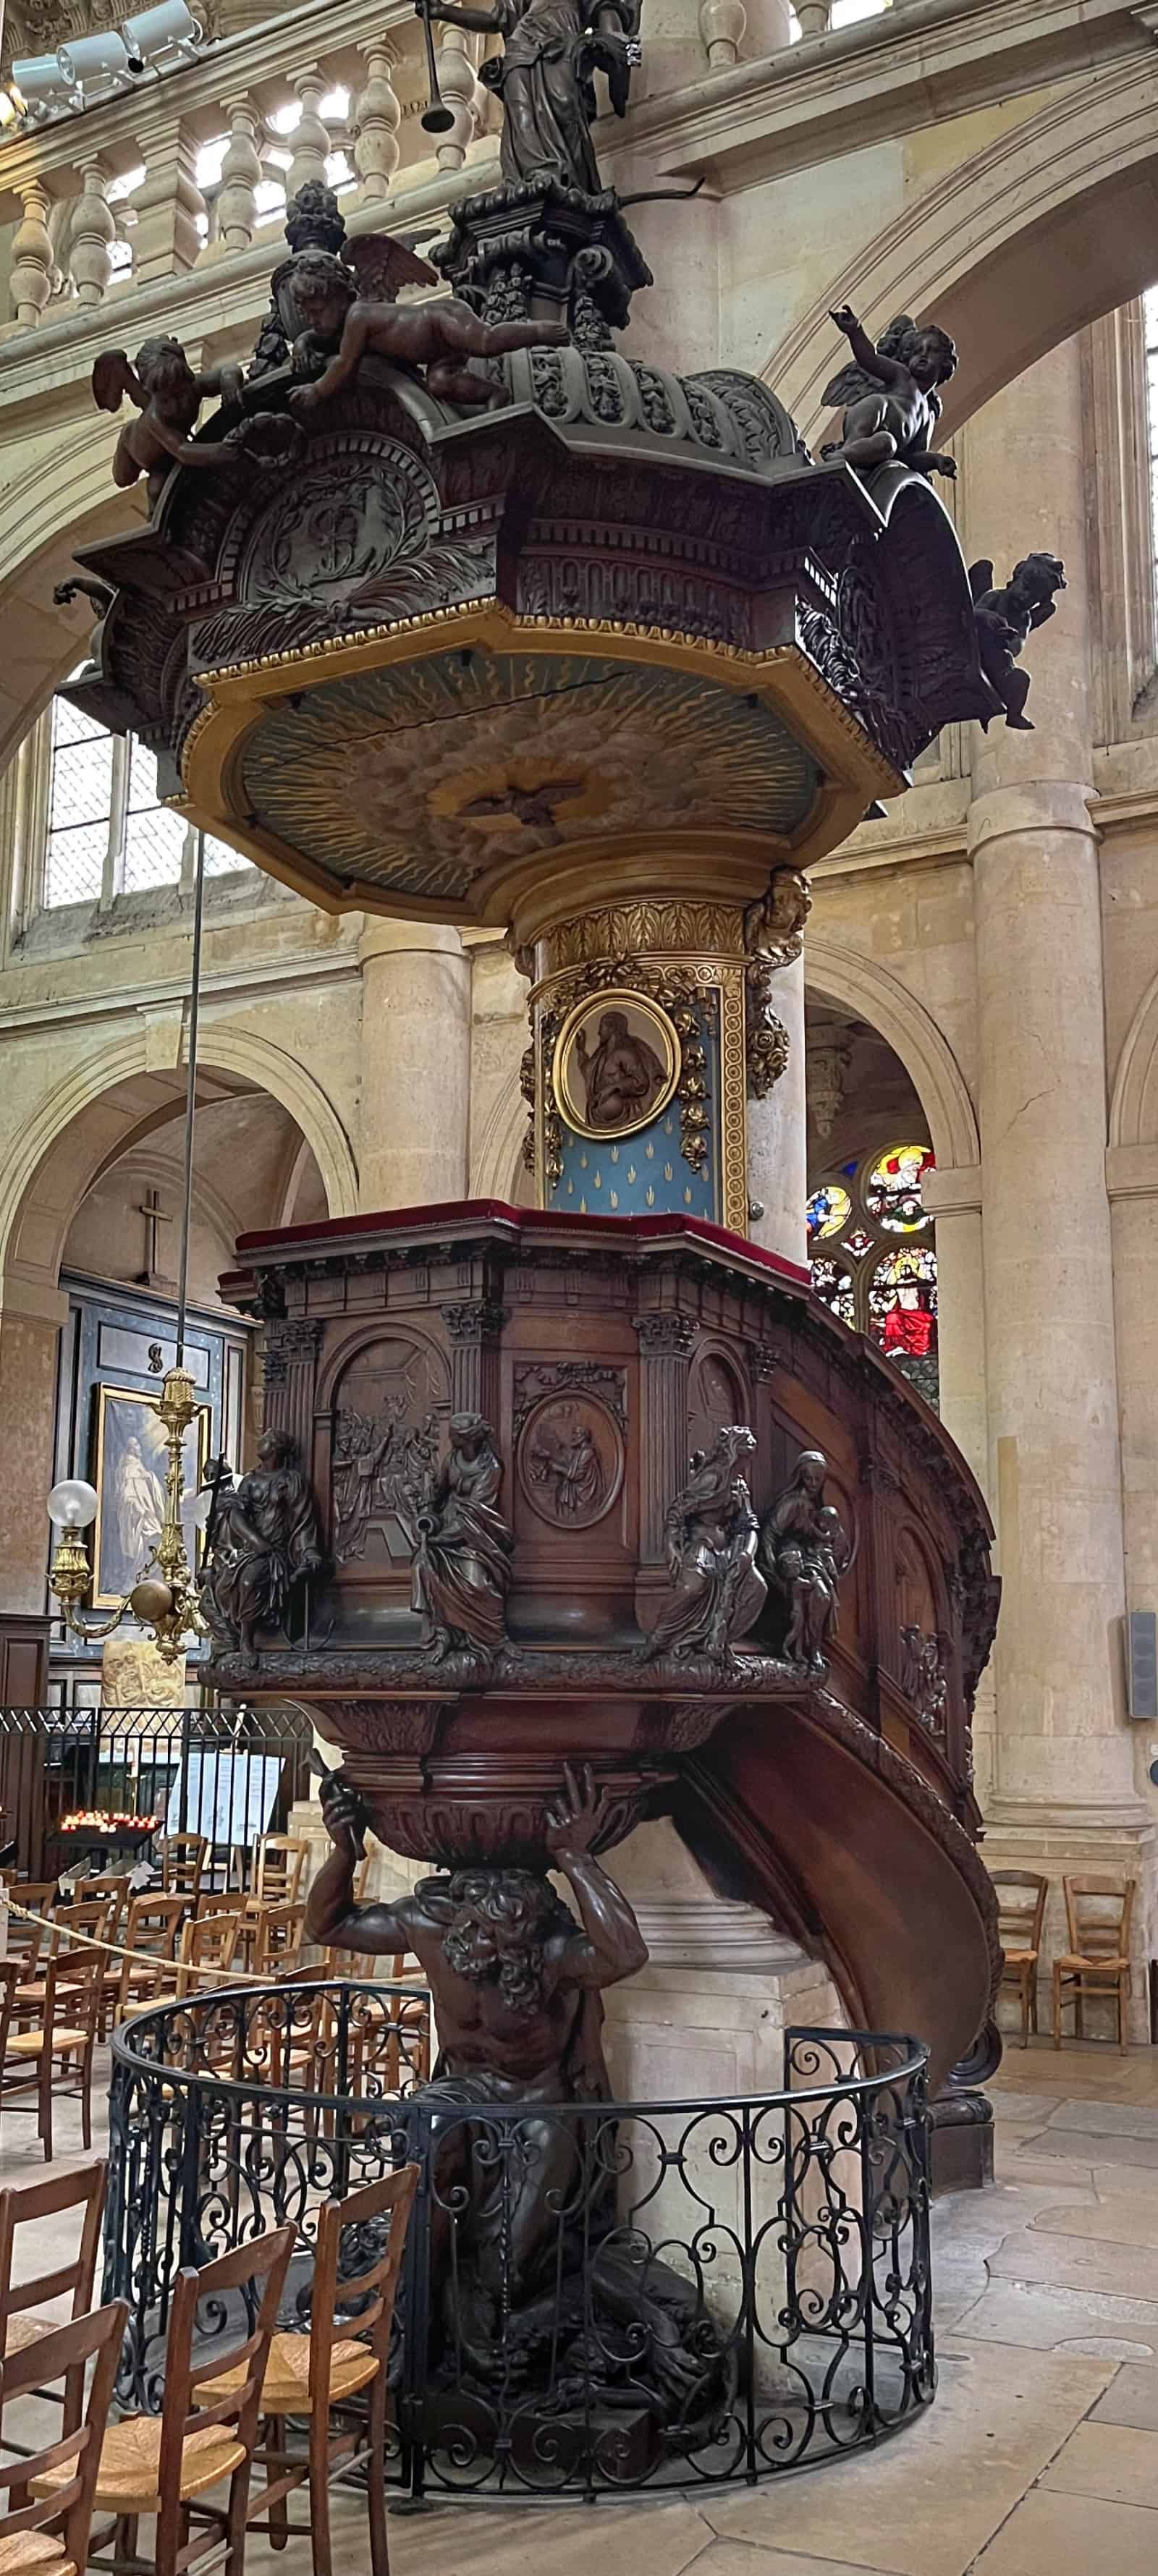 The base of the pulpit, supported by Samson kneeling on a lion